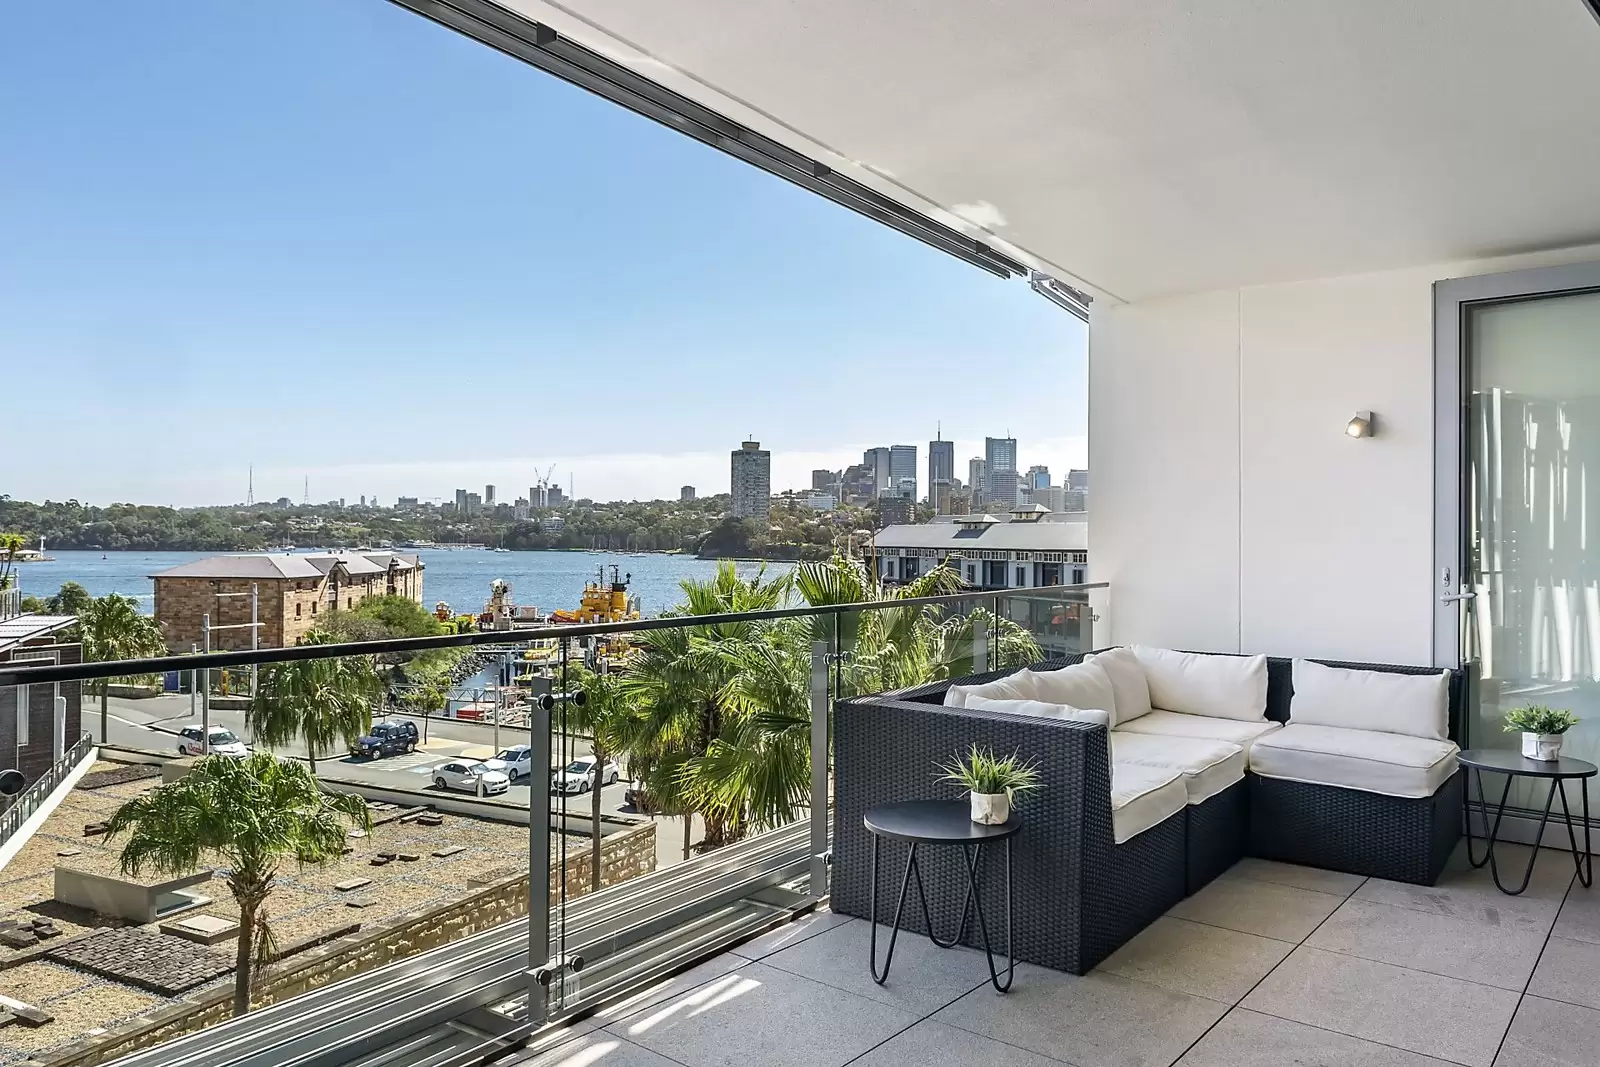 Photo #4: 19/5 Towns Place, Walsh Bay - Sold by Sydney Sotheby's International Realty